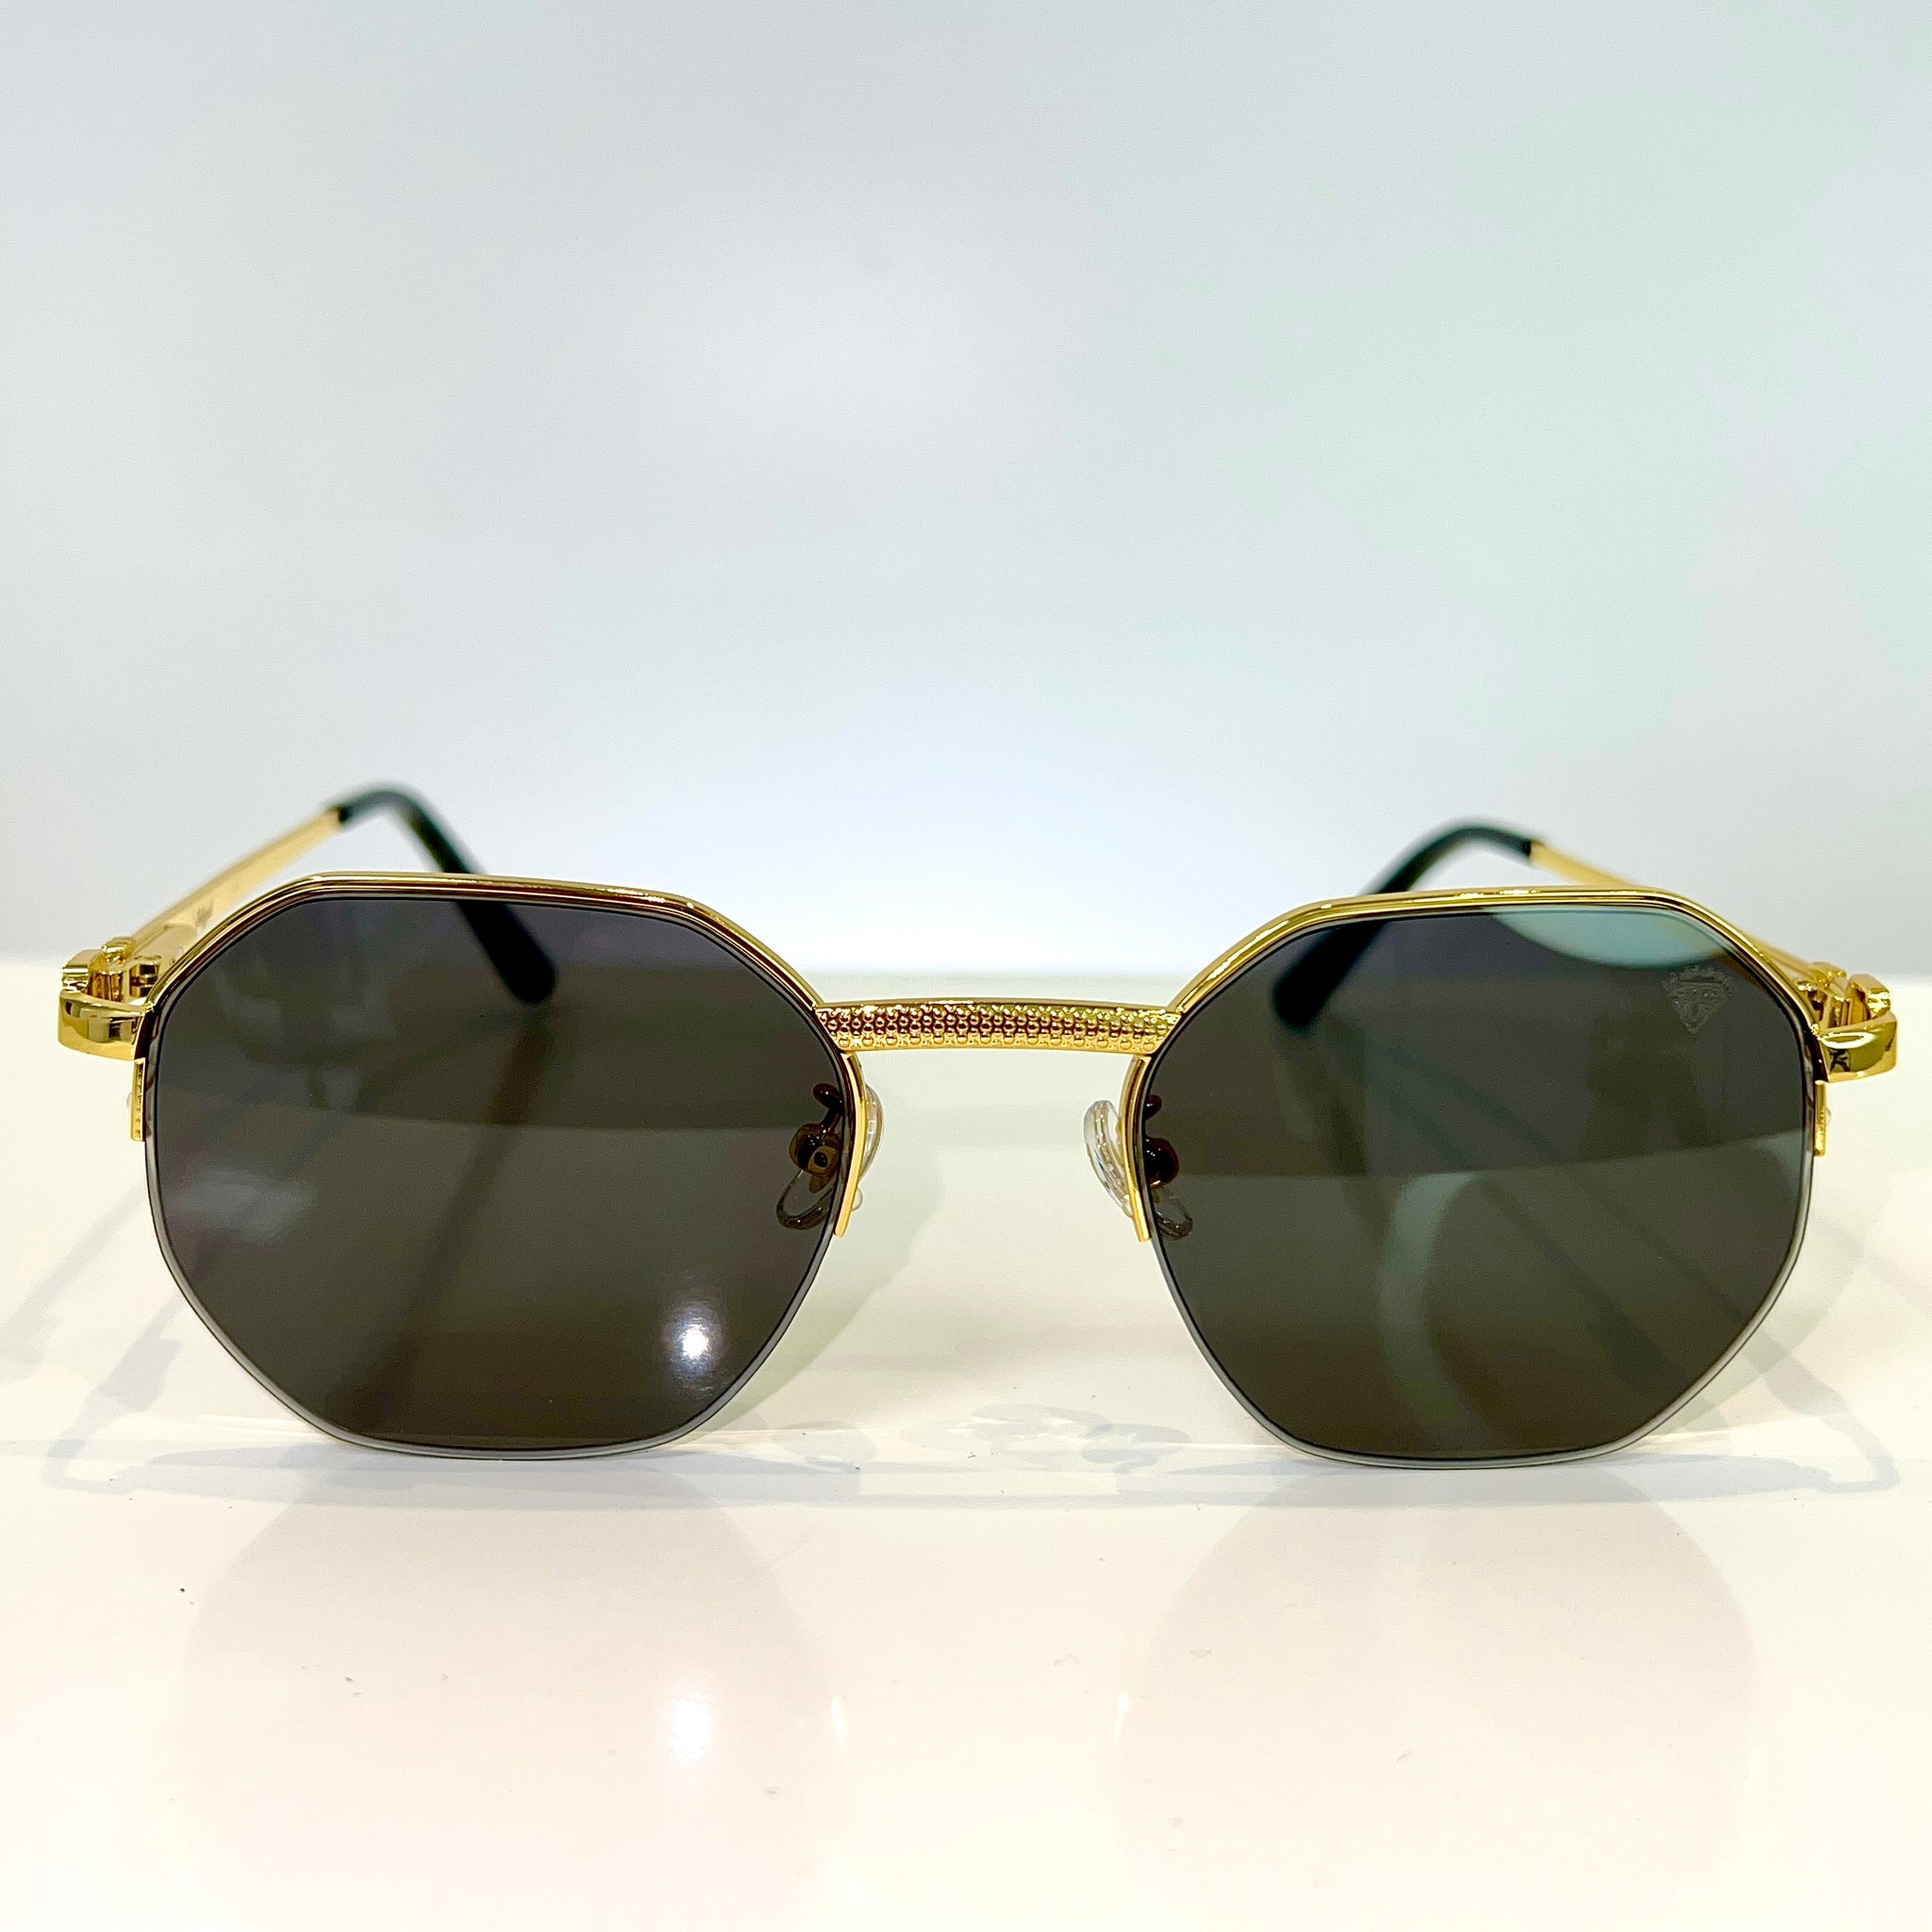 Los Angeles Glasses - 14 carat gold plated -  Black Shade